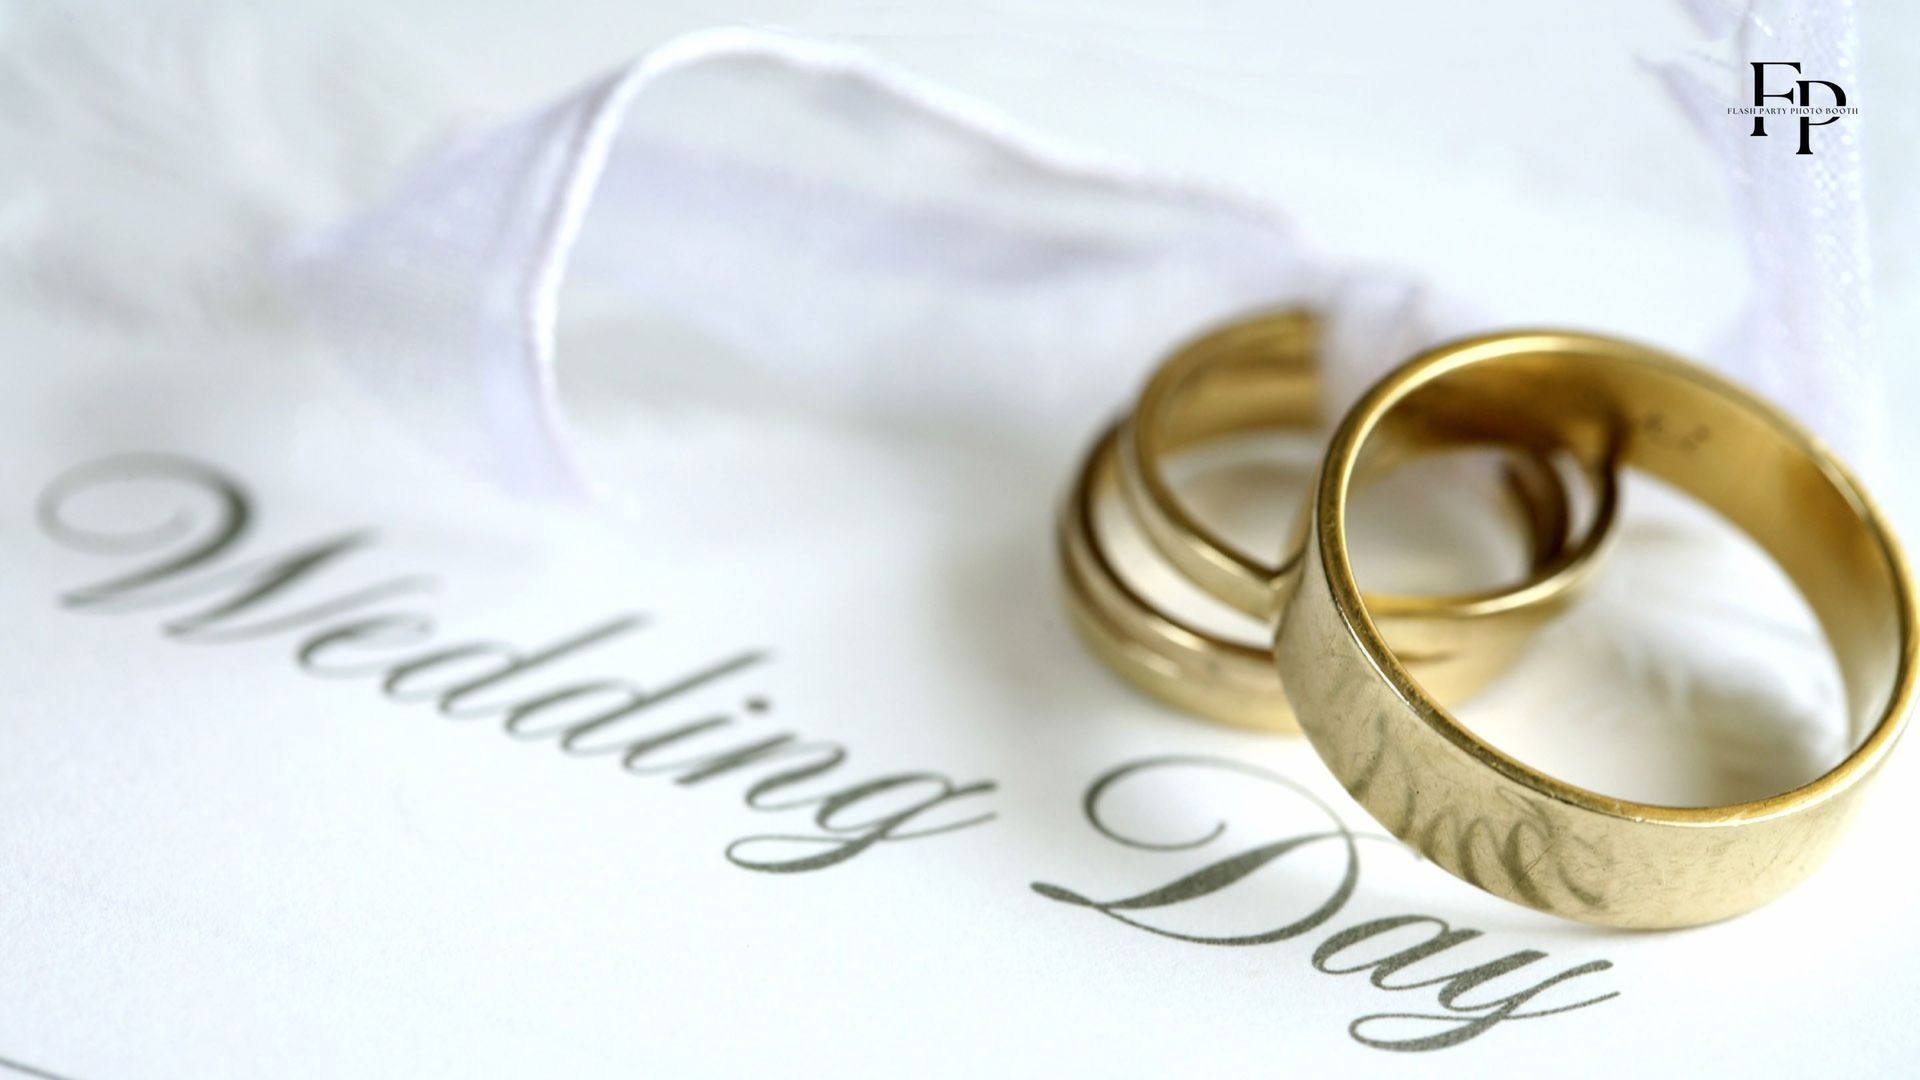 The wedding rings of the bride and the groom on top of the wedding invitation